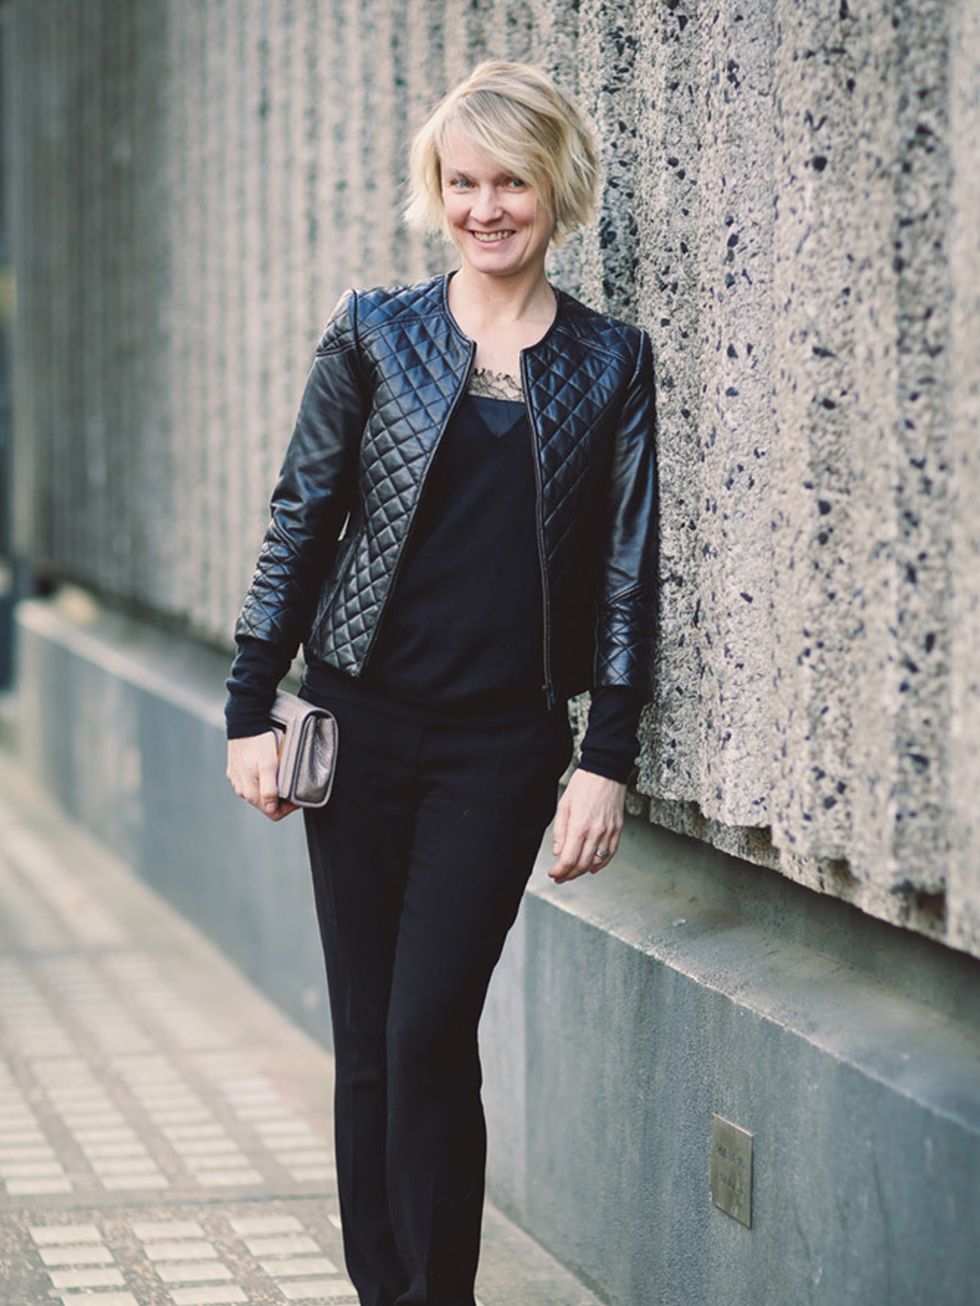 <p>Lorraine Candy - Editor-in-Chief.</p>

<p>Harrods leather jacket, Joseph jumper, DKNY lace camisole, Joseph trousers, Jimmy Choo clutch and Carvela by Kurt Geiger shoes.</p>